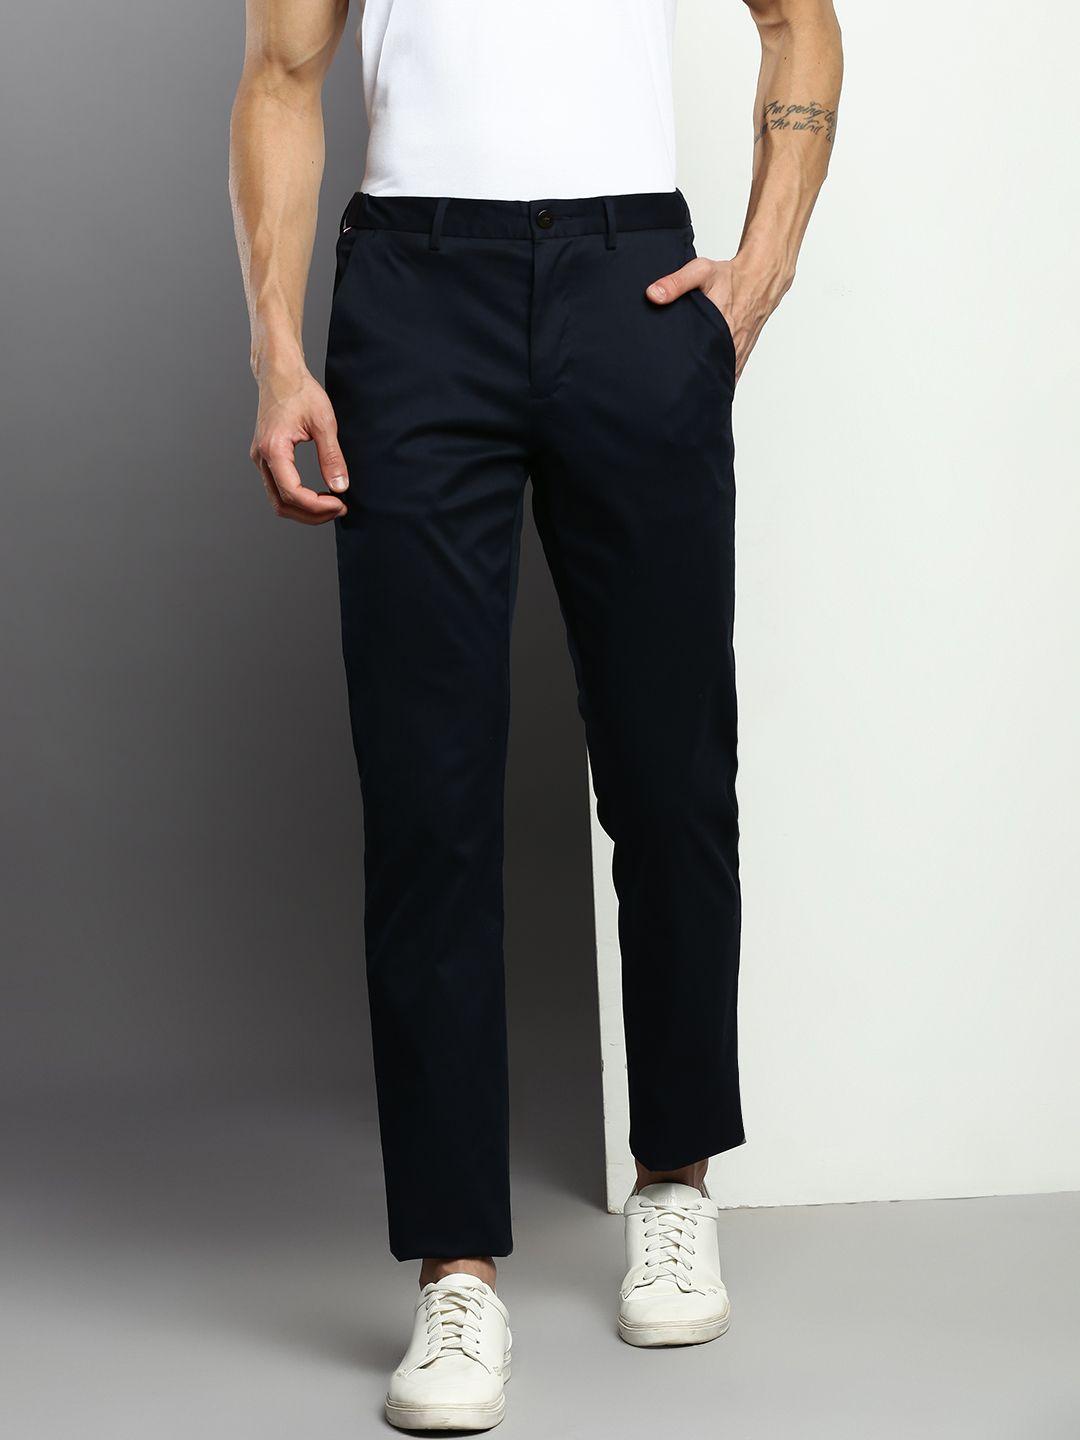 tommy-hilfiger-men-solid-chinos-trousers